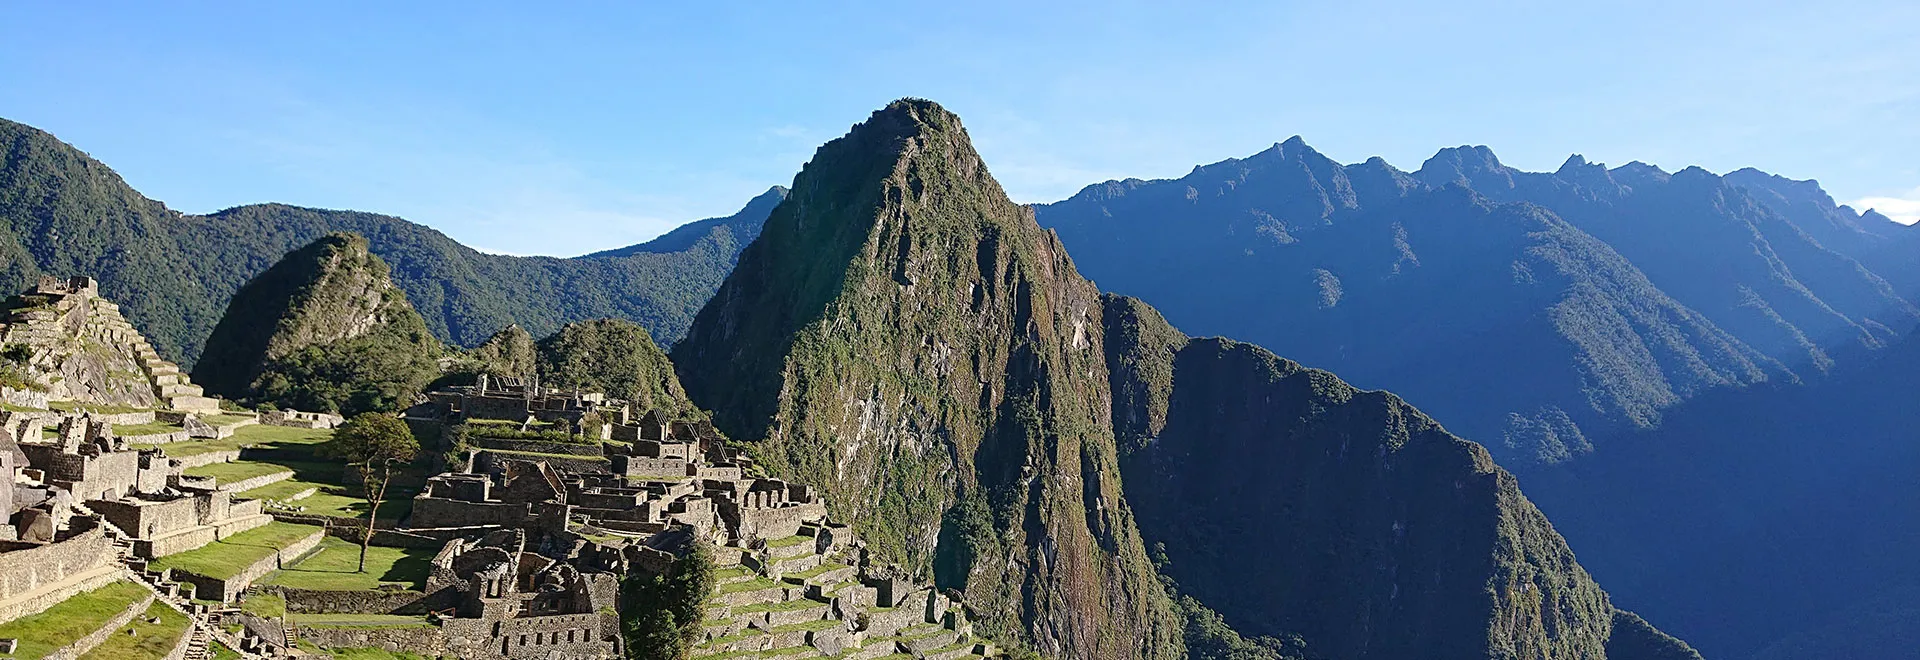 Overcoming numerous obstacles to successfully broadcast the world&#39;s first 4K live broadcast to Machu Picchu in South America